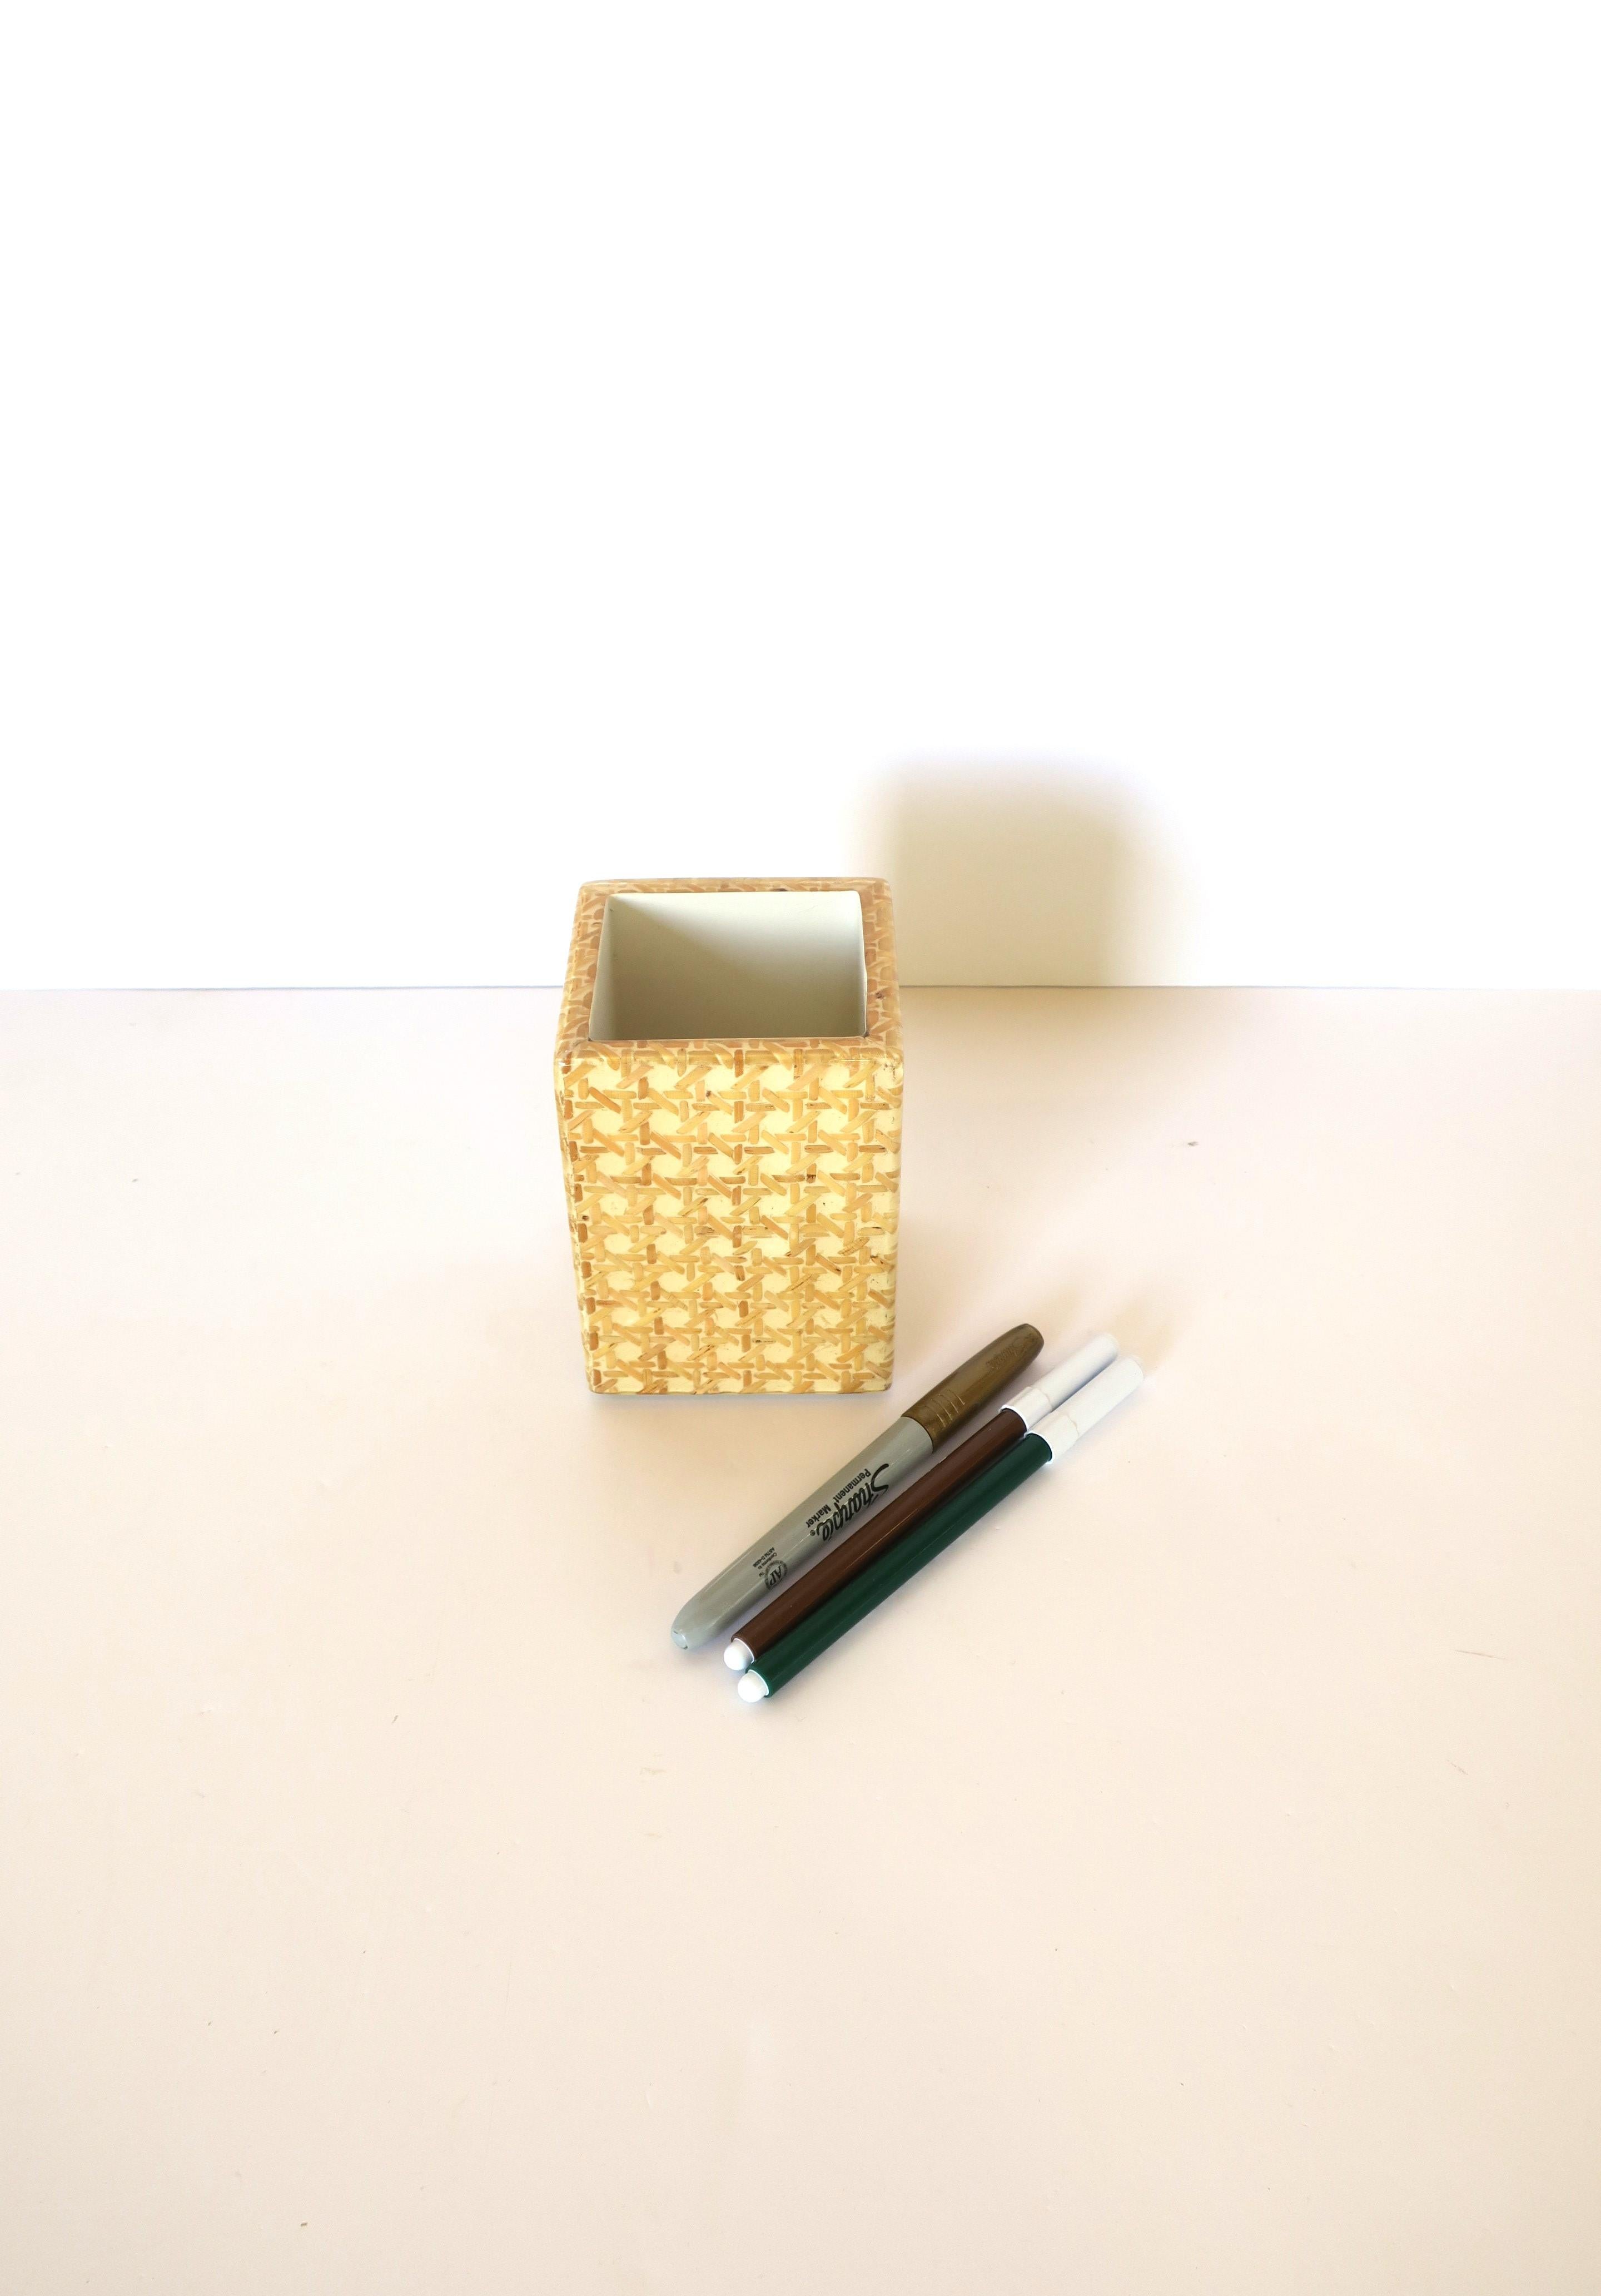 Wicker Cane Bathroom Vanity Brush or Pen Desk Accessory Holder In Excellent Condition For Sale In New York, NY